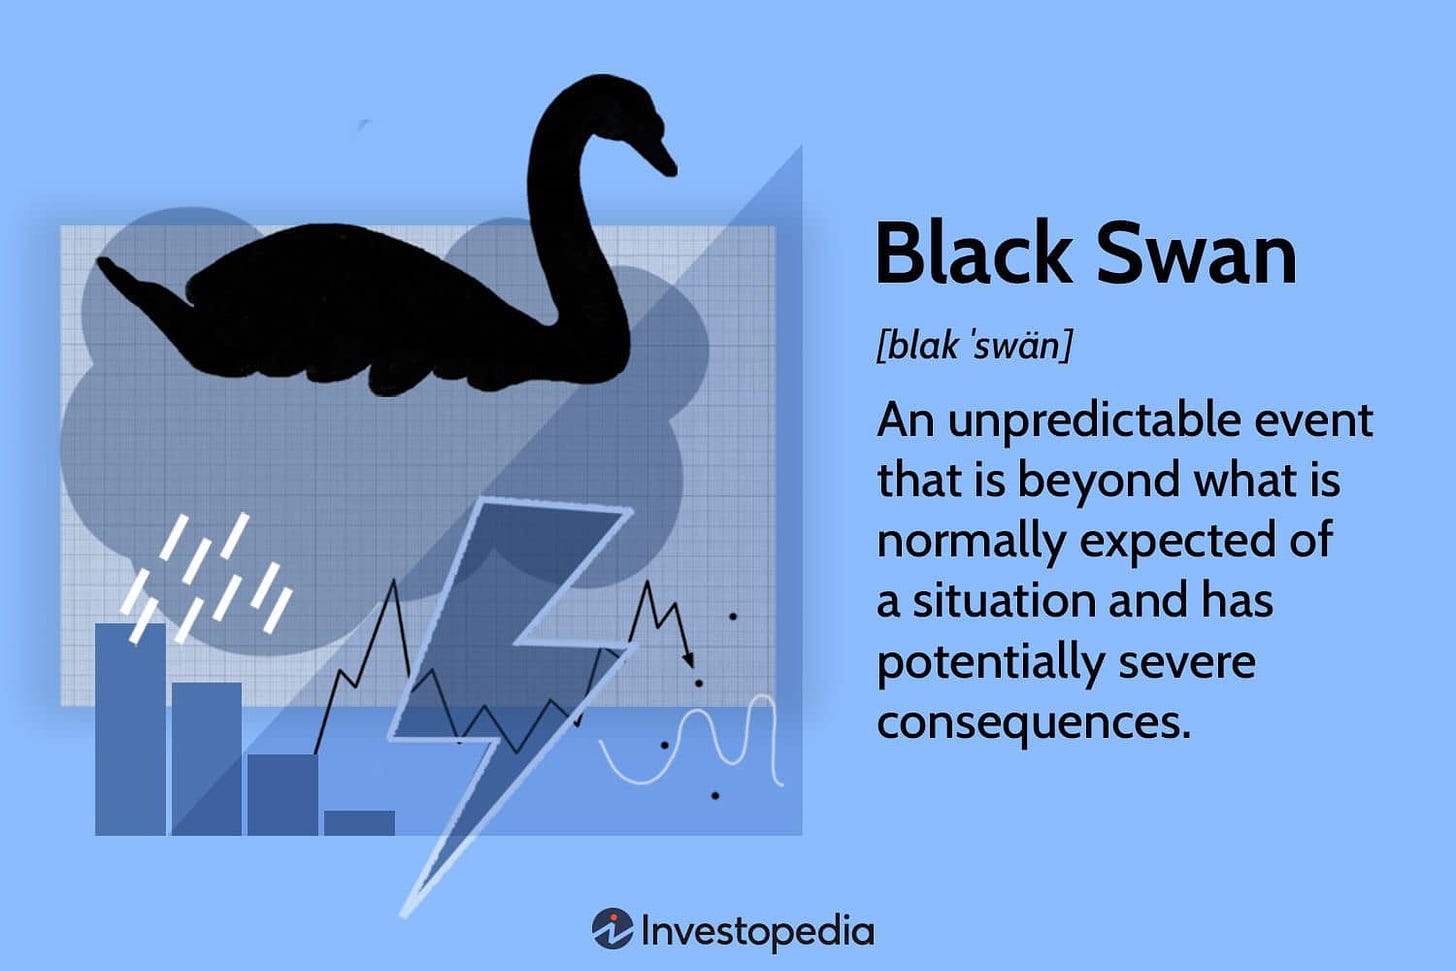 May be a doodle of swan and text that says 'Black Swan [blak 'swän] An unpredictable event that is beyond what is normally expected of a situation and has potentially severe consequences. Investopedia'